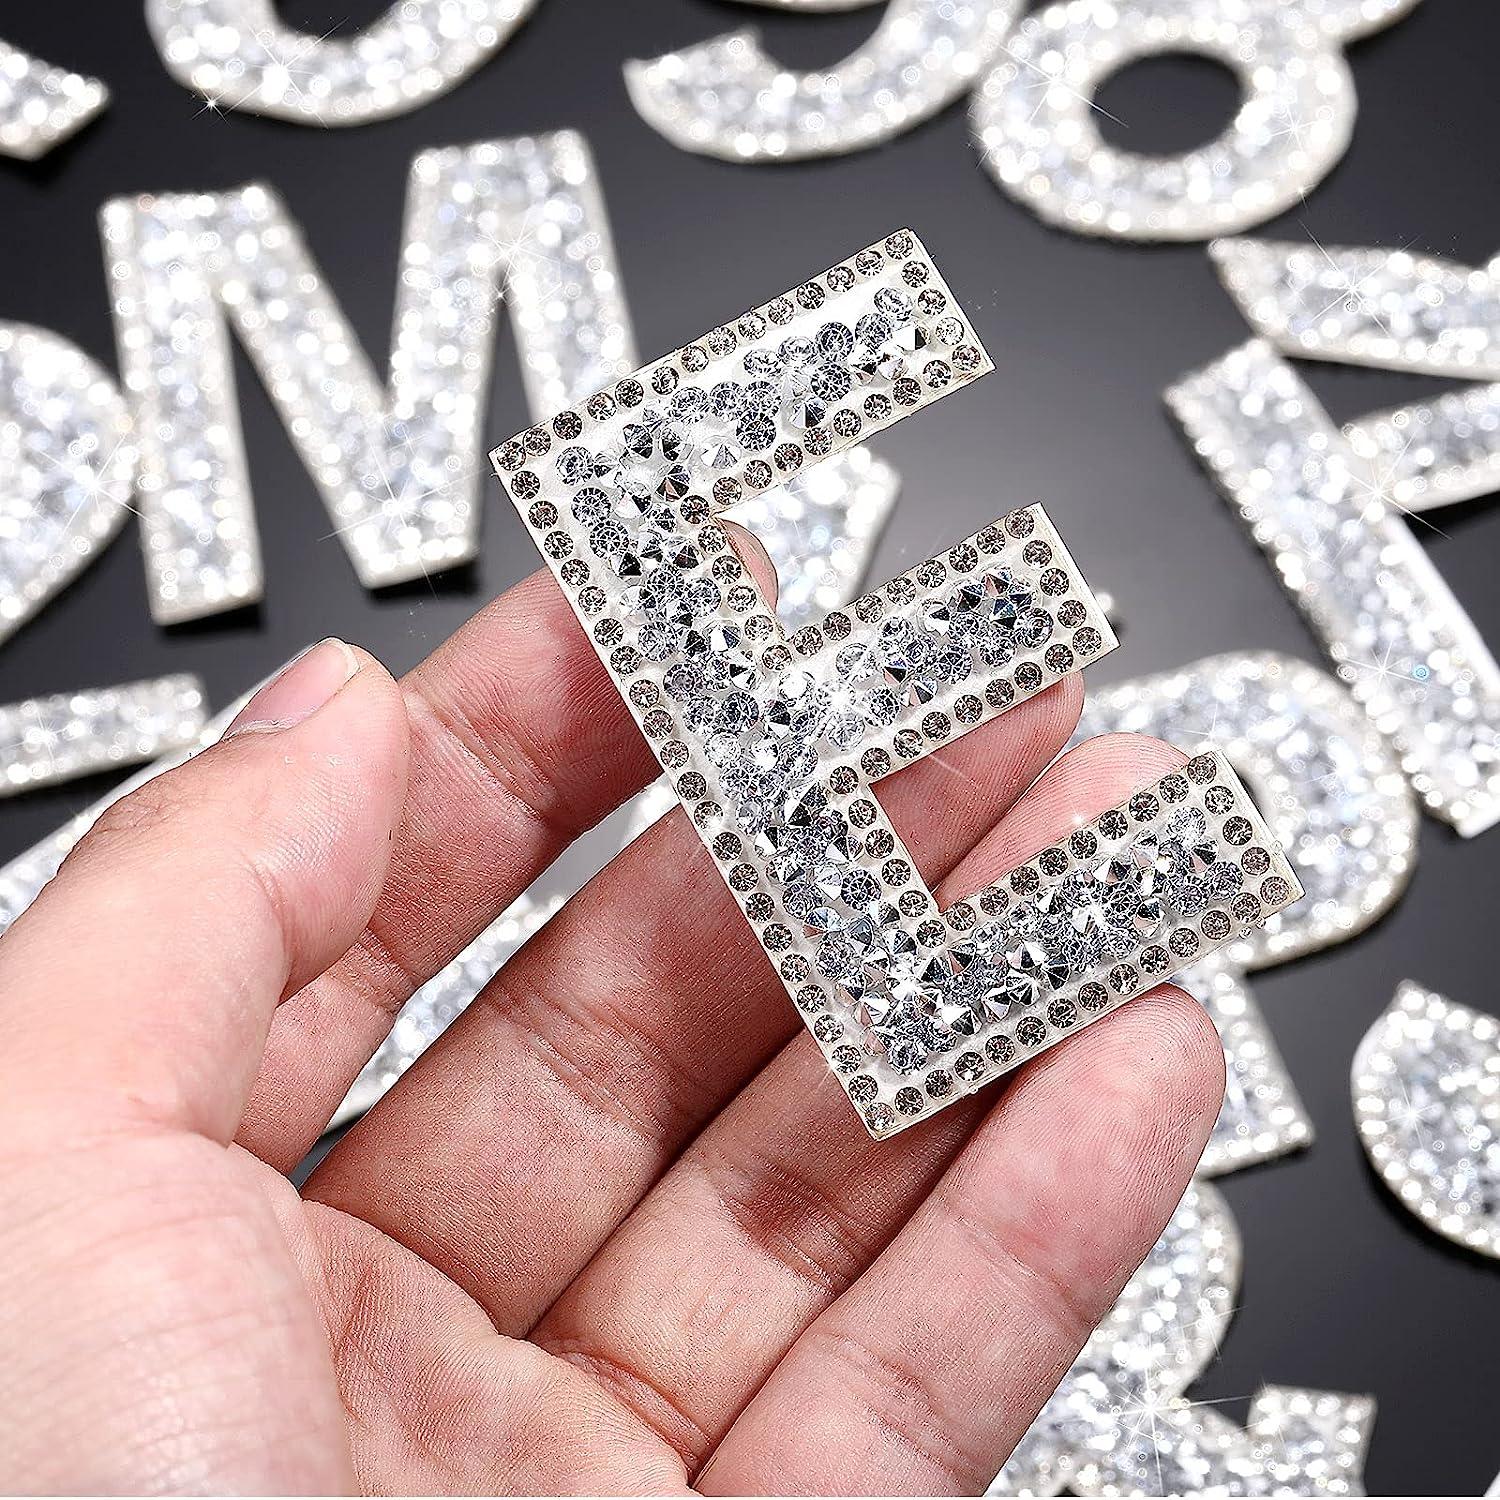  52 Pieces Rhinestone Letter Stickers, DaKuan Large Glitter  Alphabet Self-Adhesive Stickers Iron on Letters for Clothing DIY Art Crafts  (Silver)